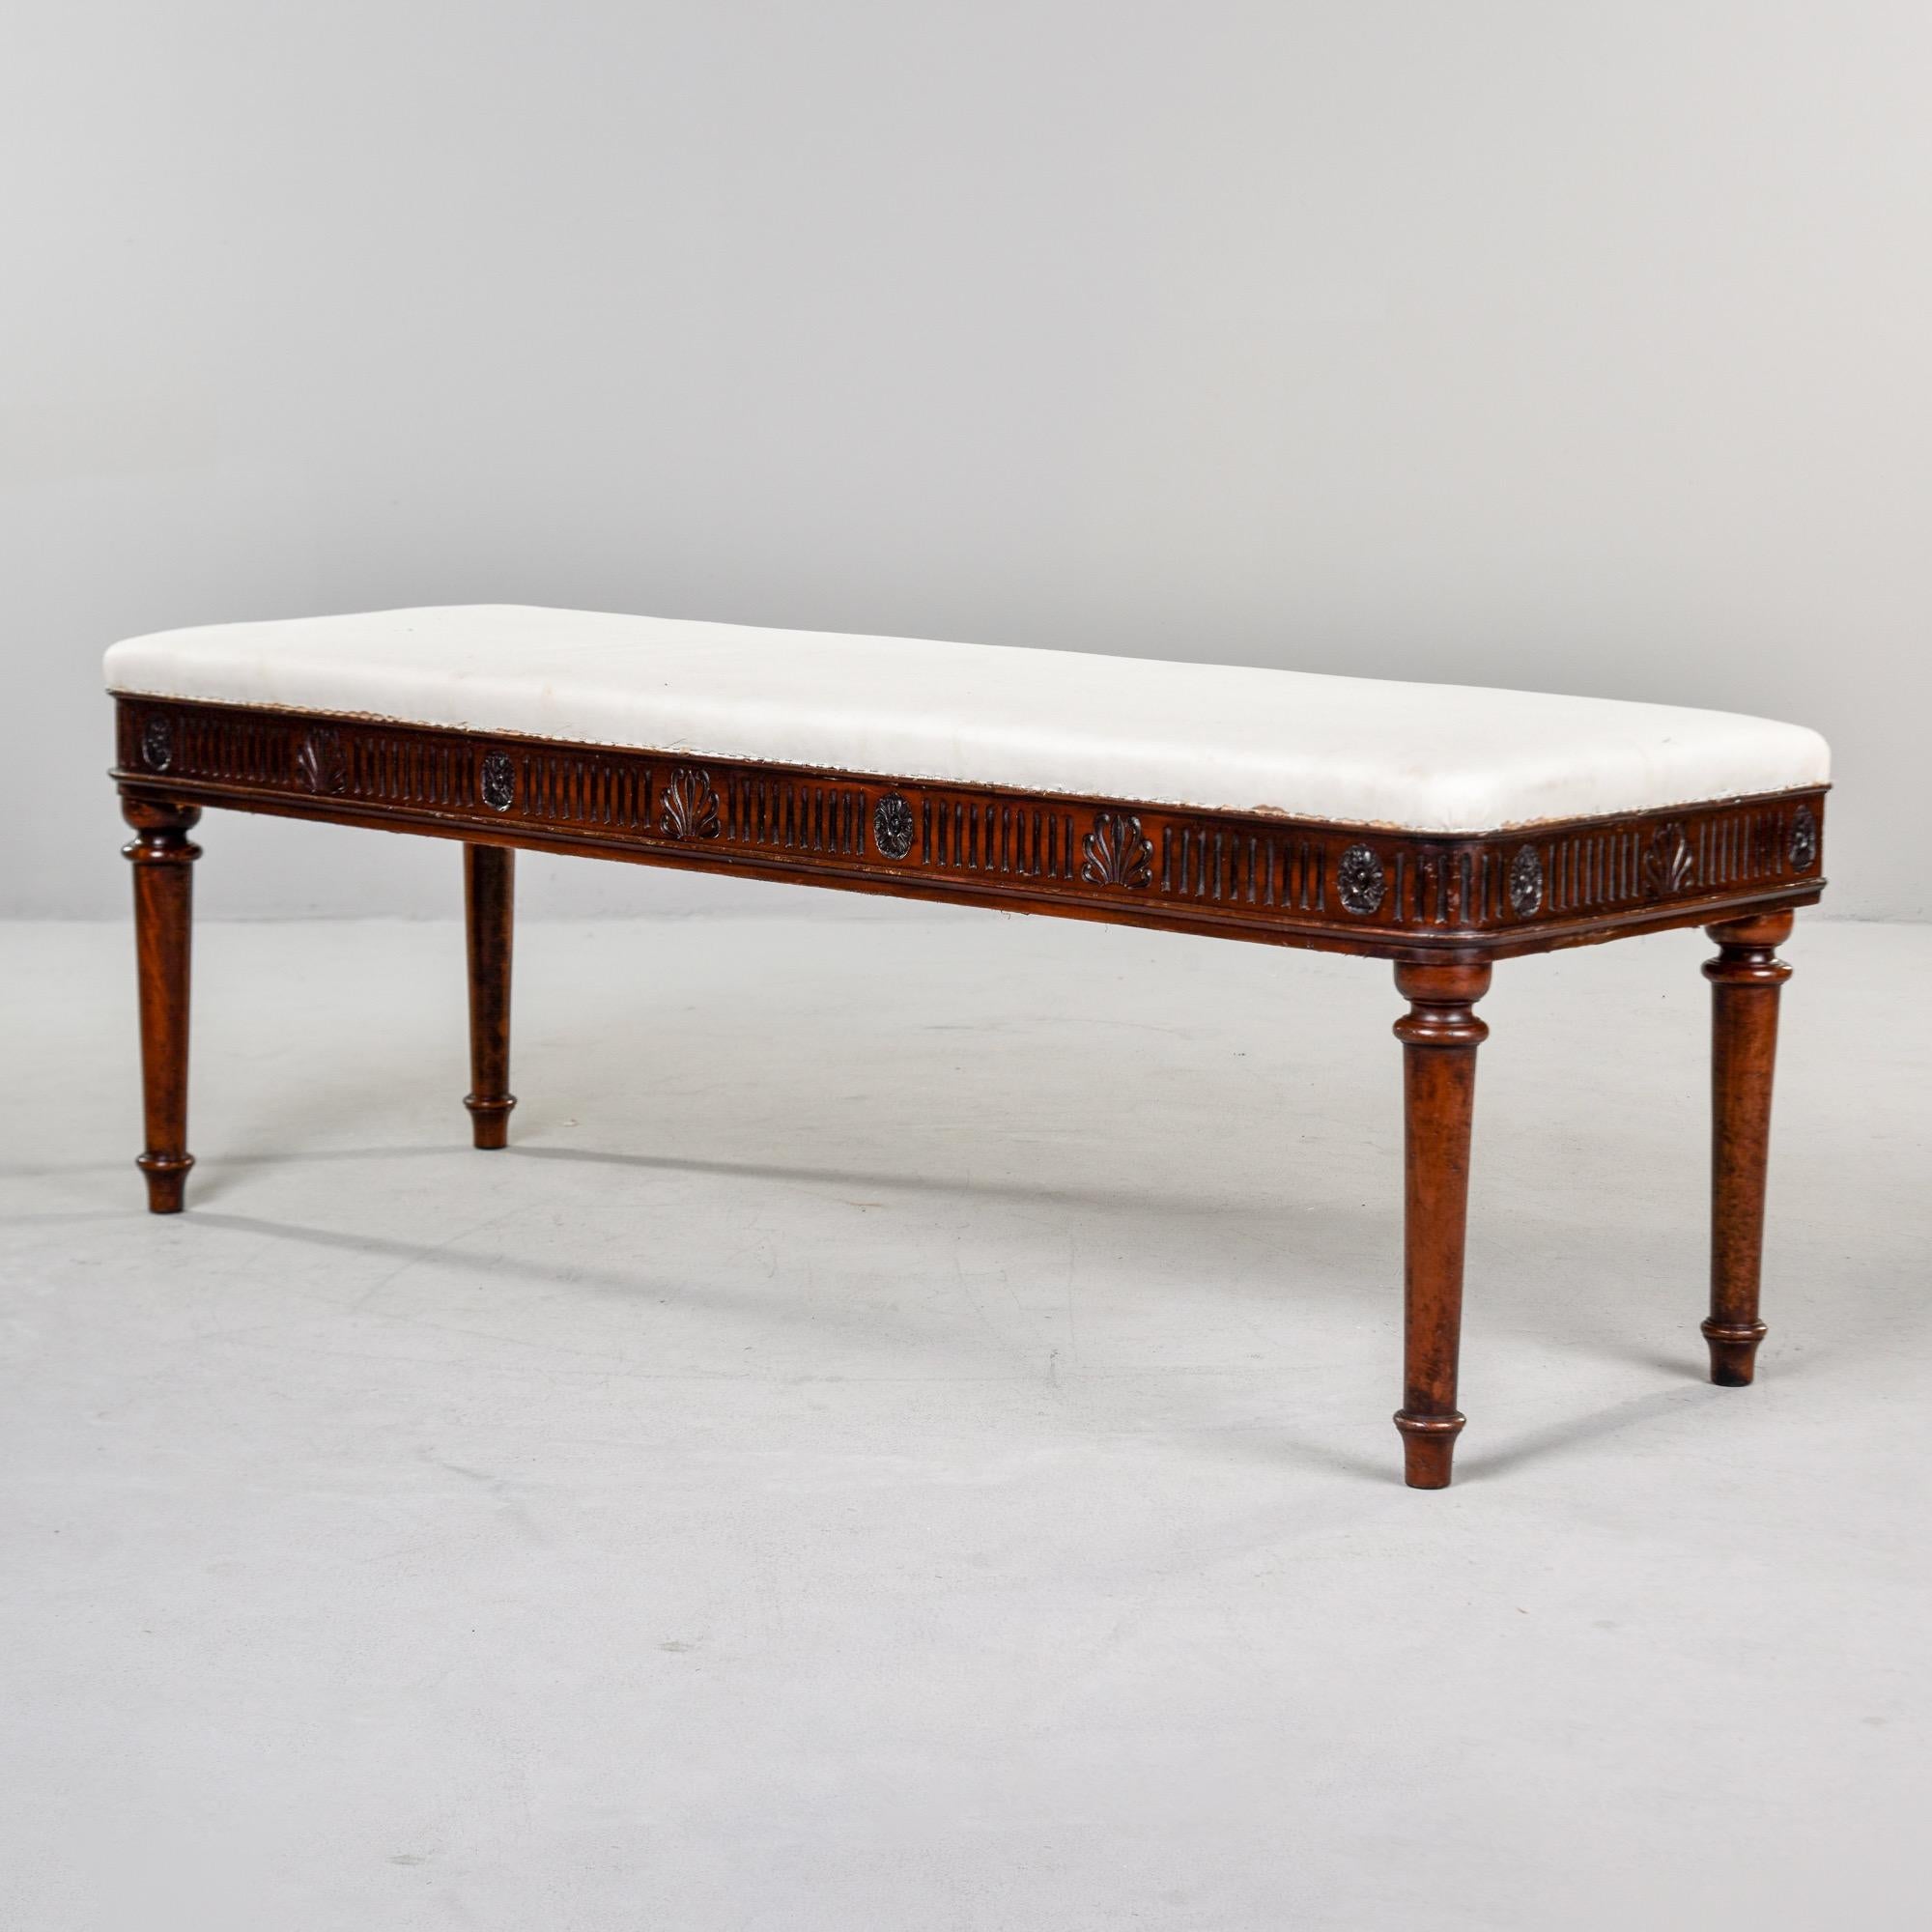 Found in England, this Regency style window seat or bench dates from the mid 1800s. Bench is mahogany with turned legs and decorative carved details including fans, rosettes and reeding. Stain on the frame was deepened by a professional in England.